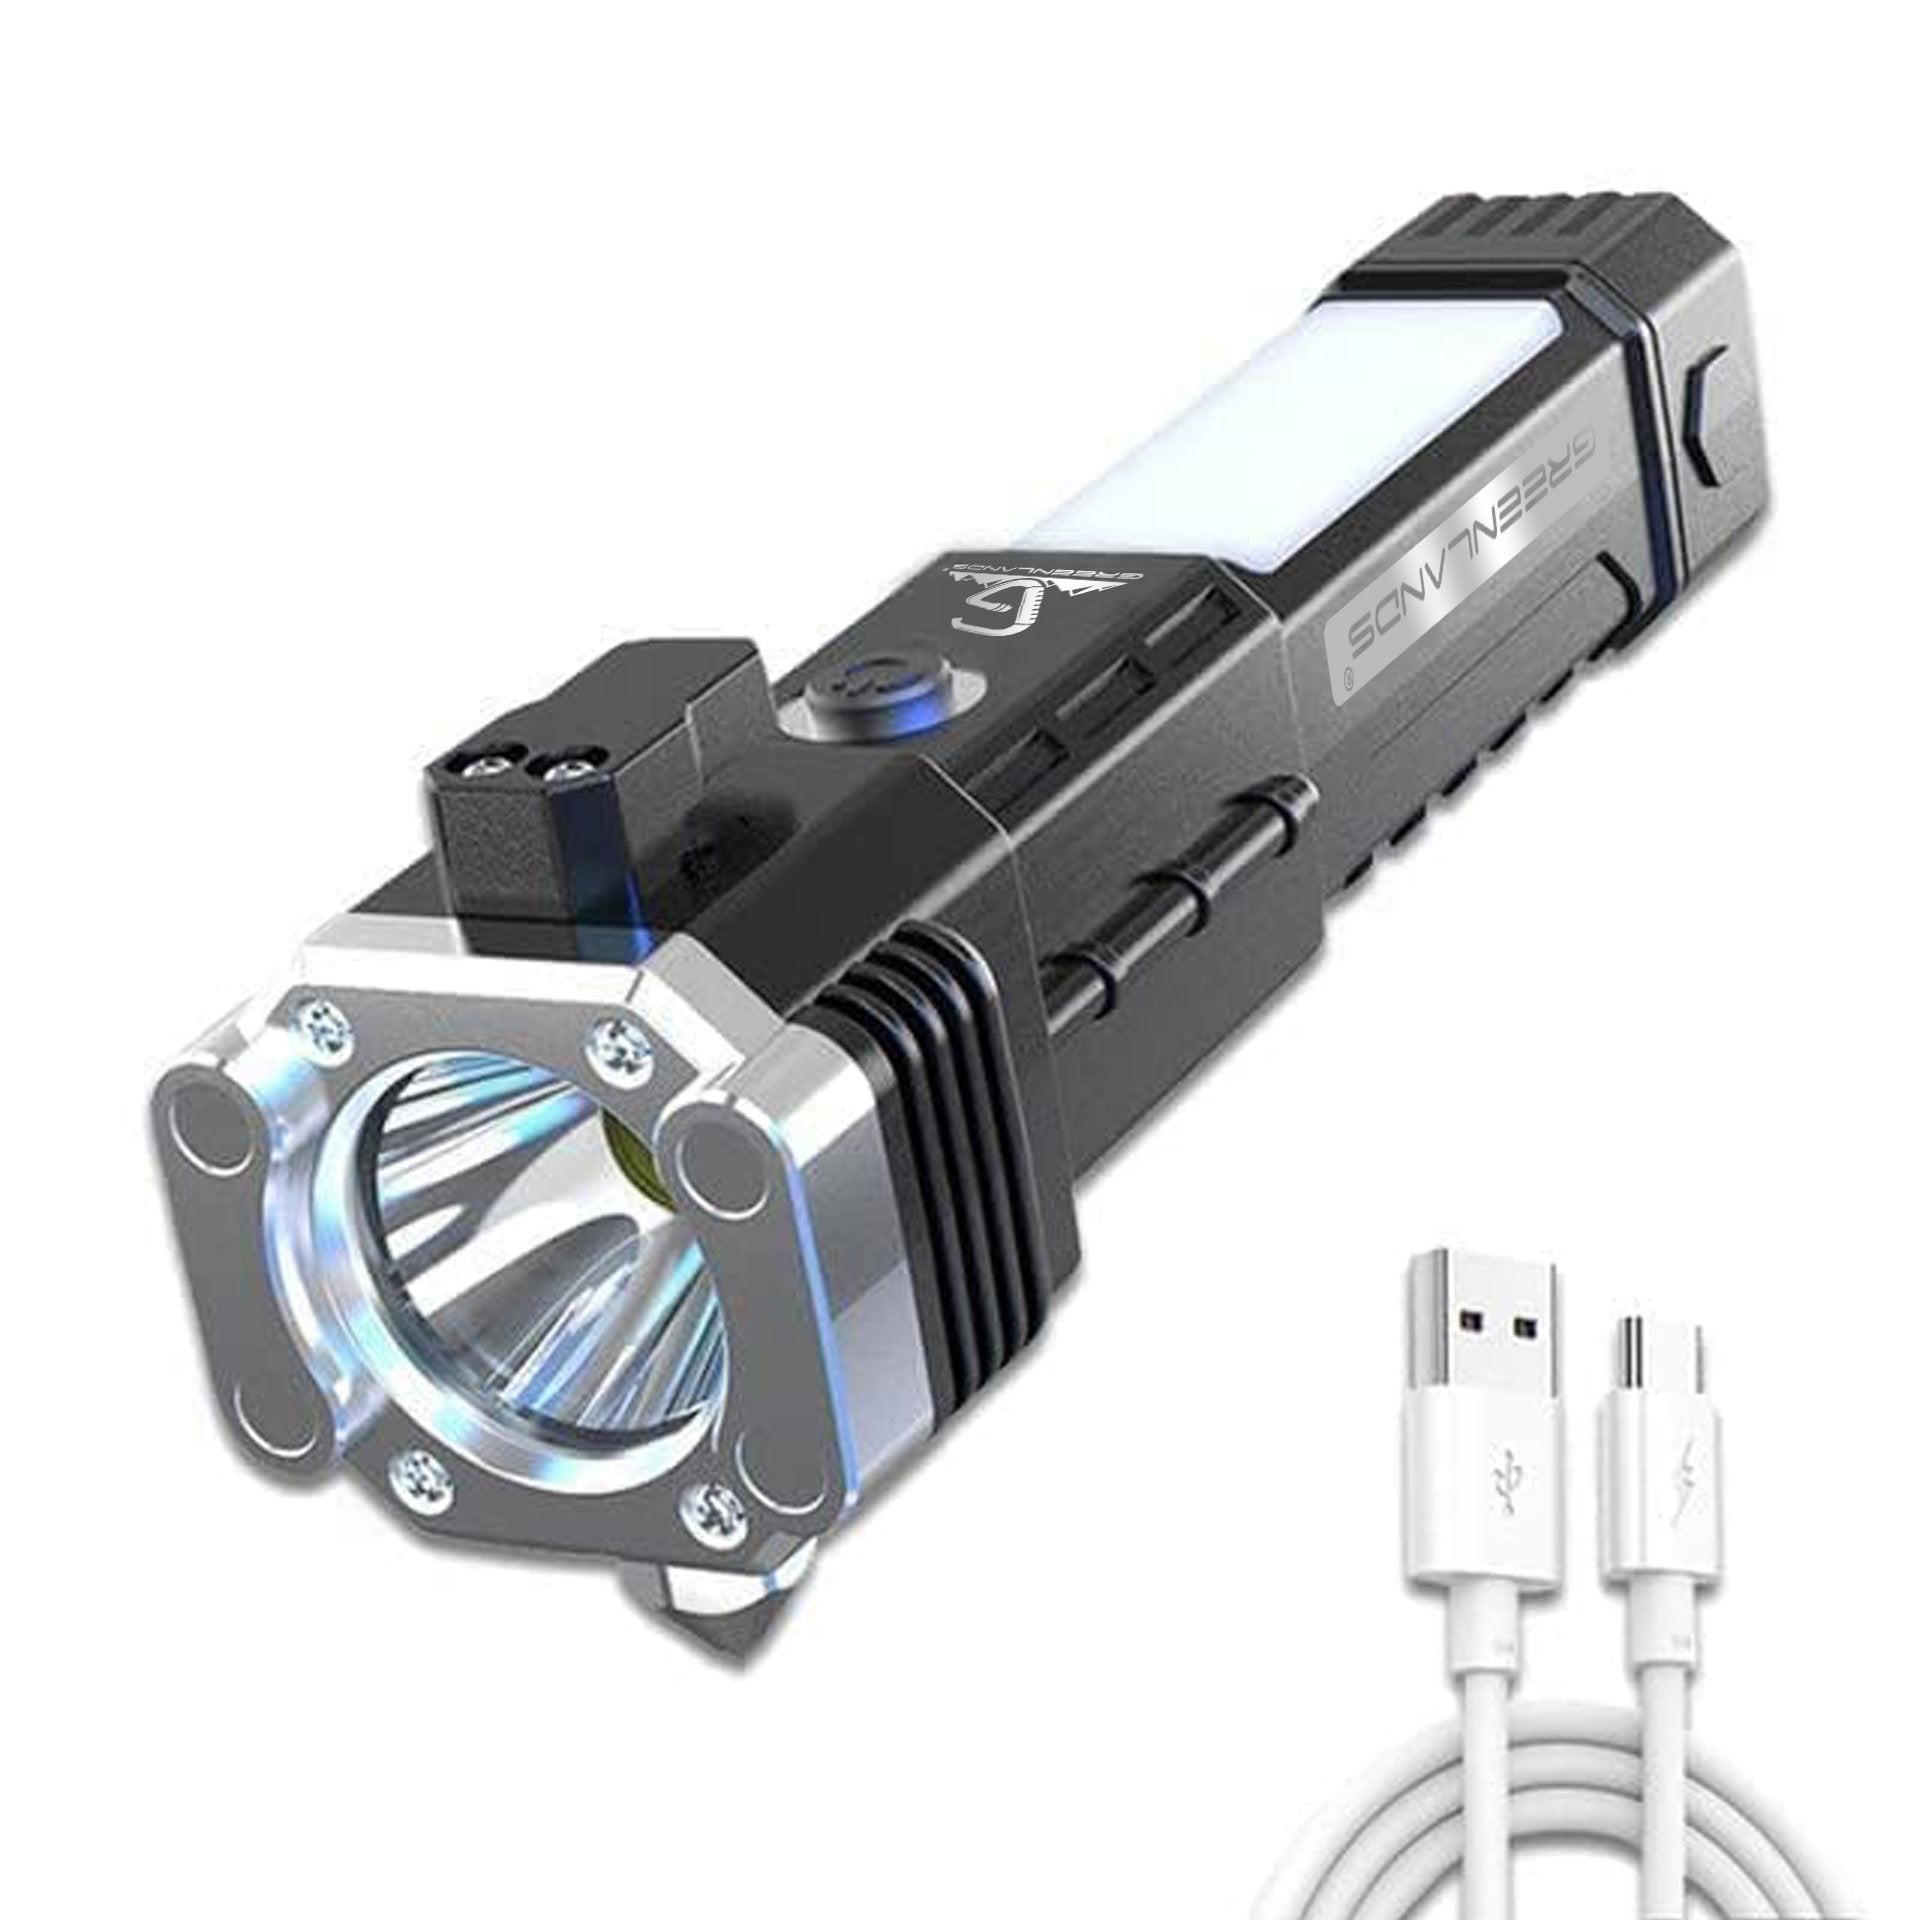 Torch Multi-Utility LED-3W for Portable Brilliance (Emergency Tool)